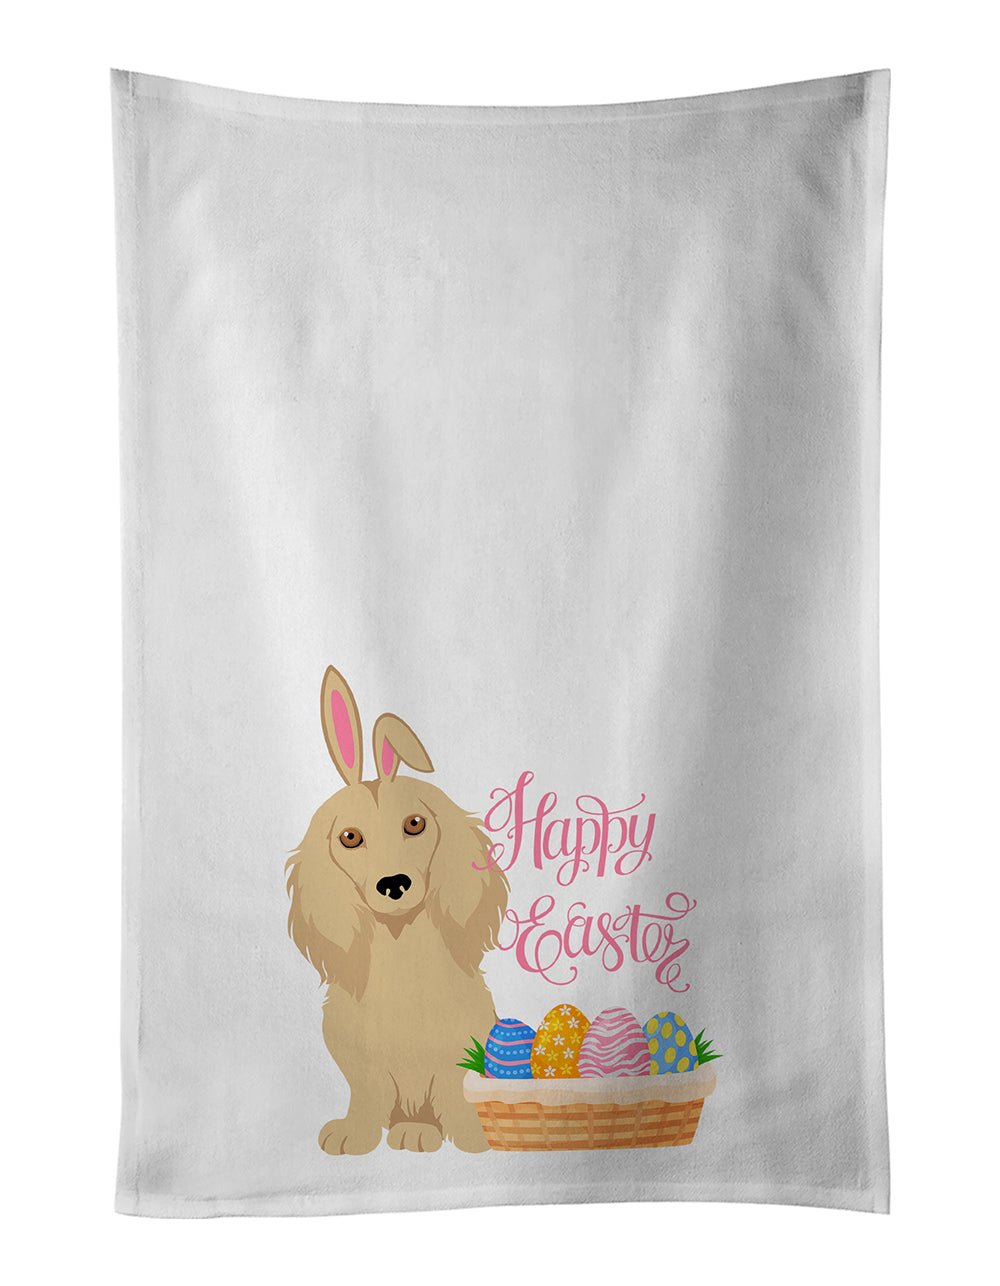 Buy this Longhair Cream Dachshund Easter White Kitchen Towel Set of 2 Dish Towels